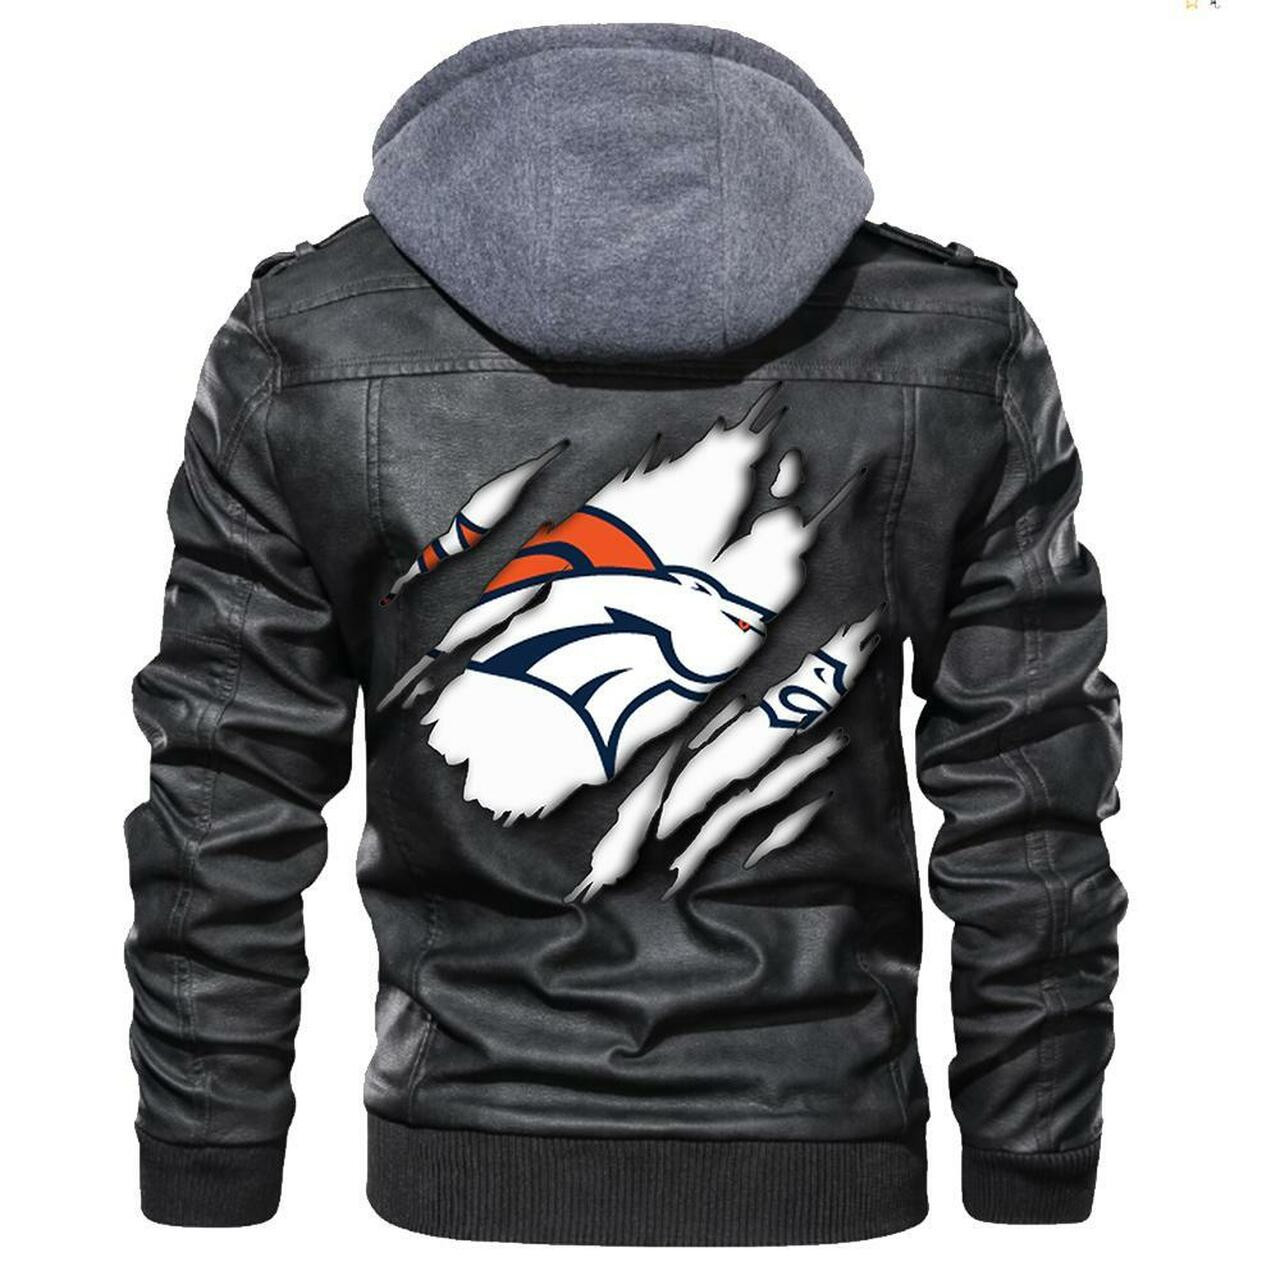 Top 200+ leather jacket so cool for your man 127